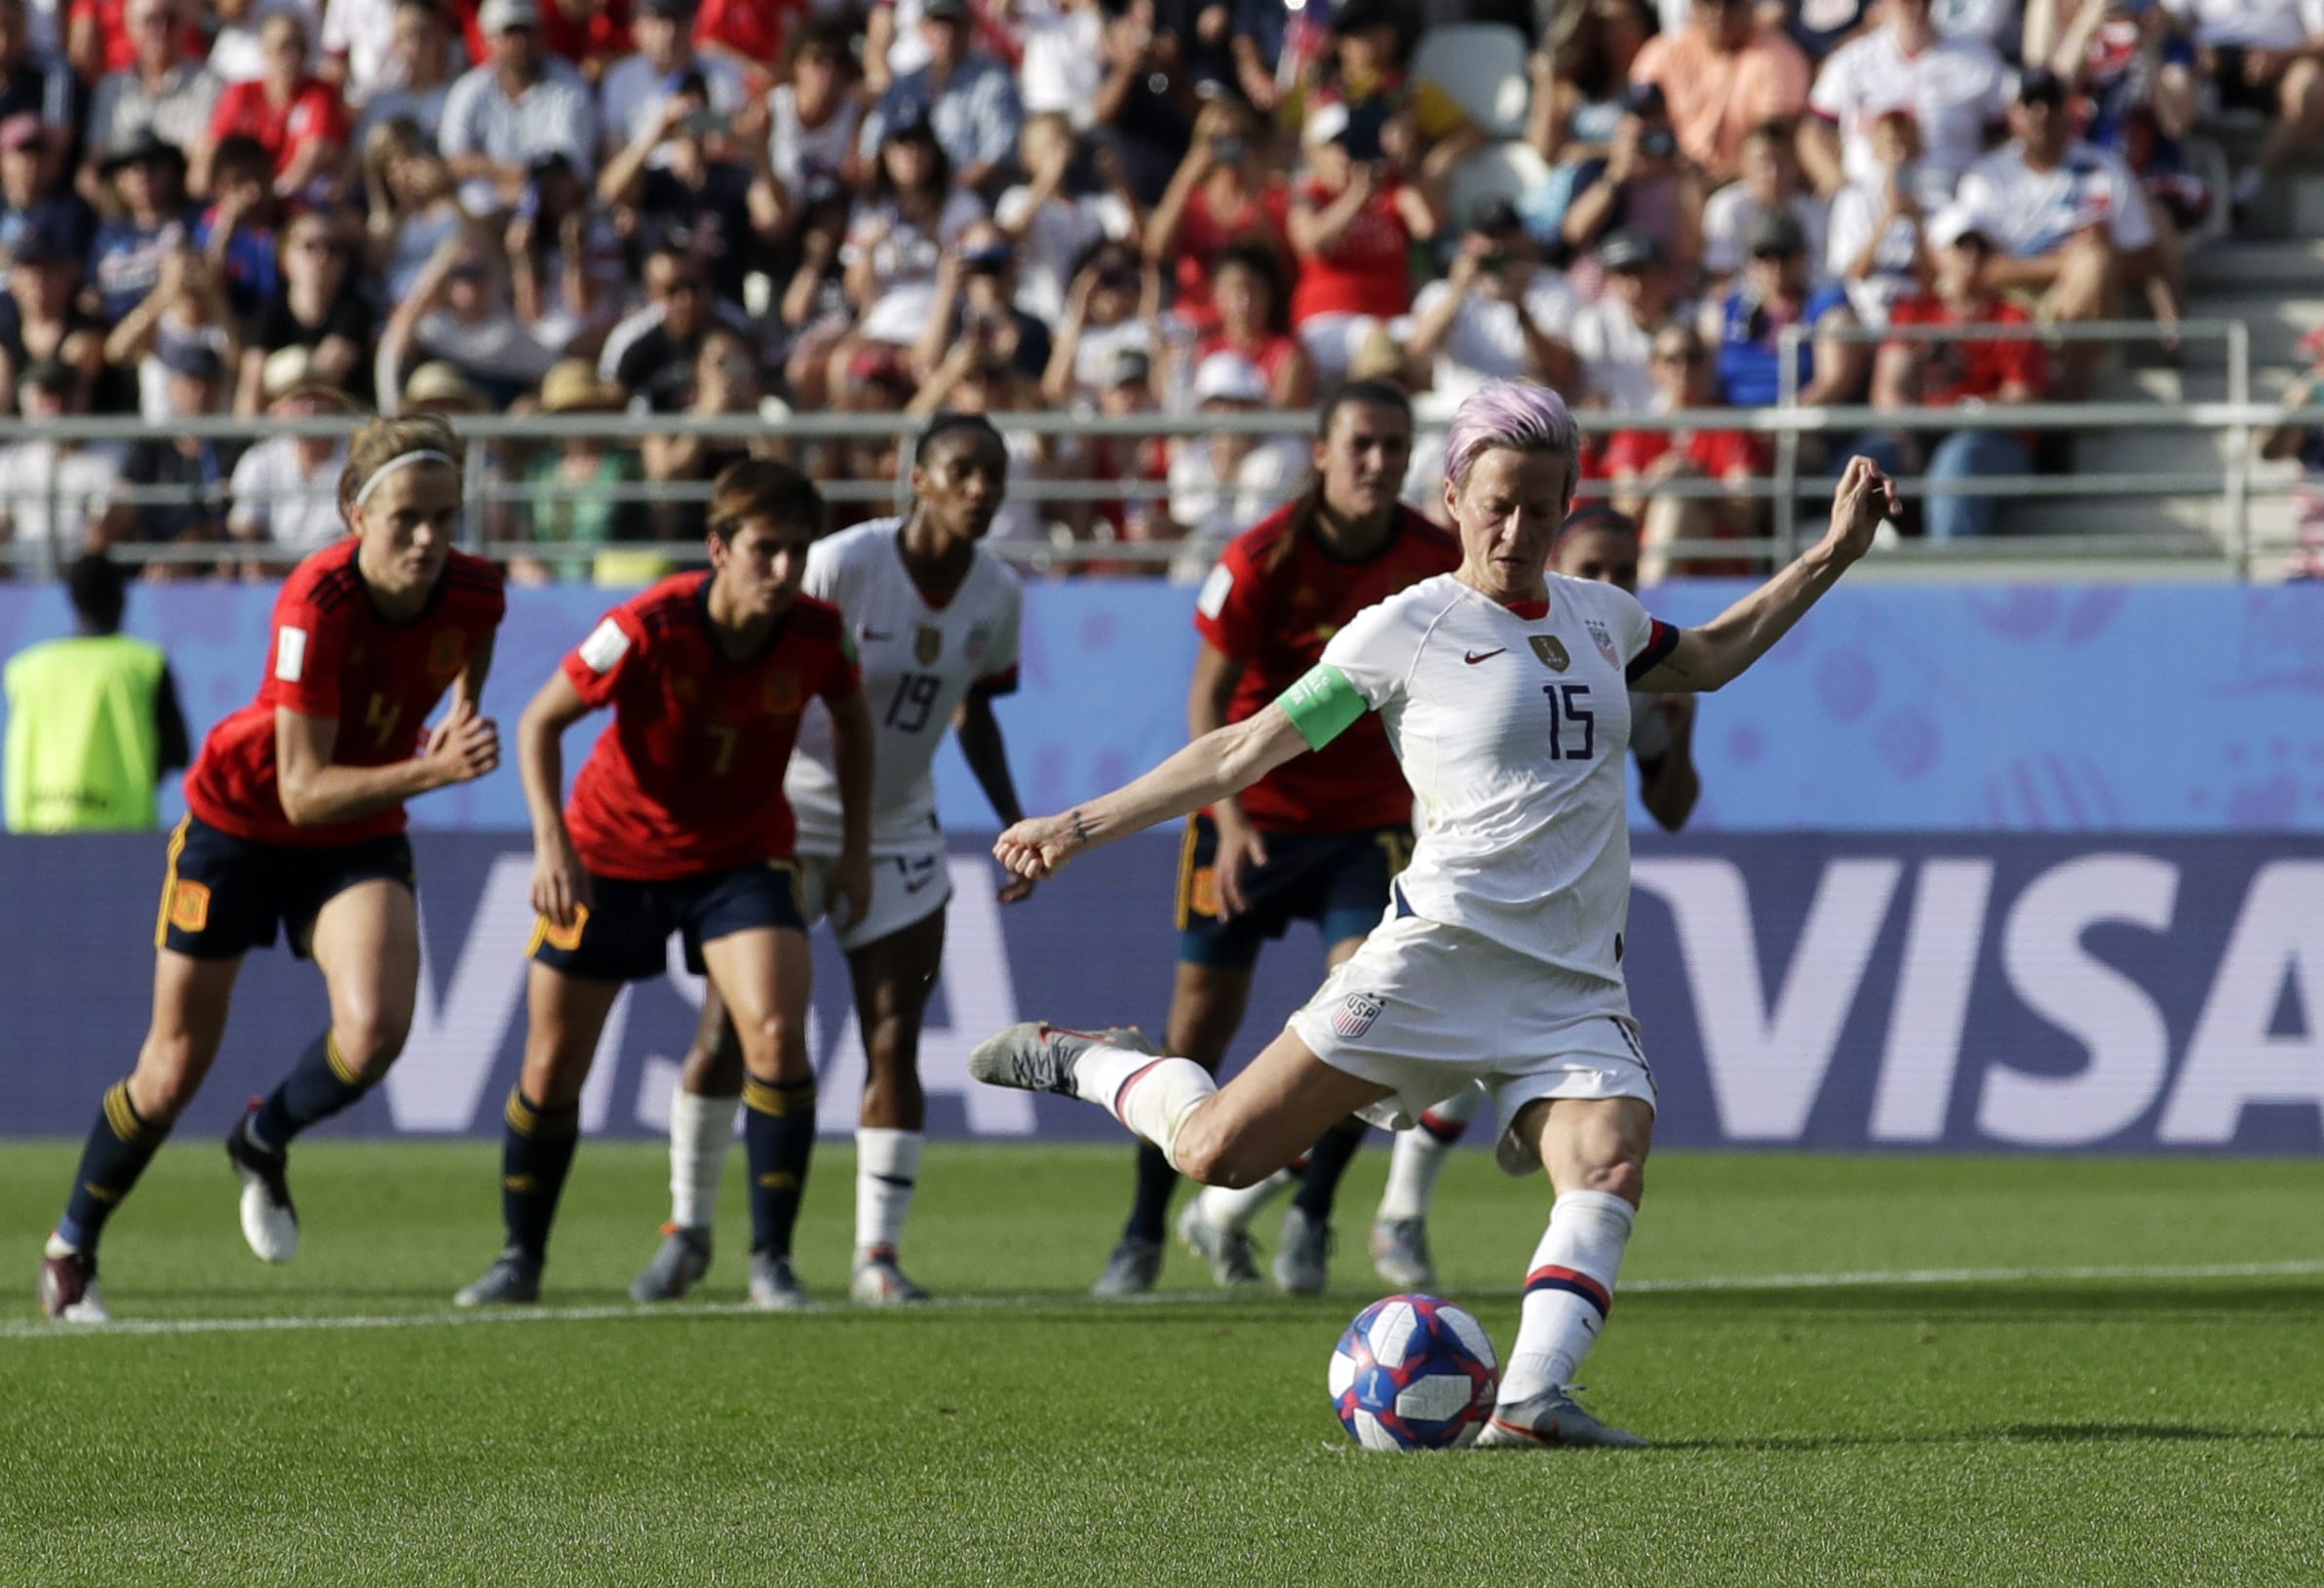 United States'Megan Rapinoe scores her side's second goal from a penalty spot during the Women's World Cup round of 16 soccer match between Spain and US at the Stade Auguste-Delaune in Reims, France, Monday, June 24, 2019.